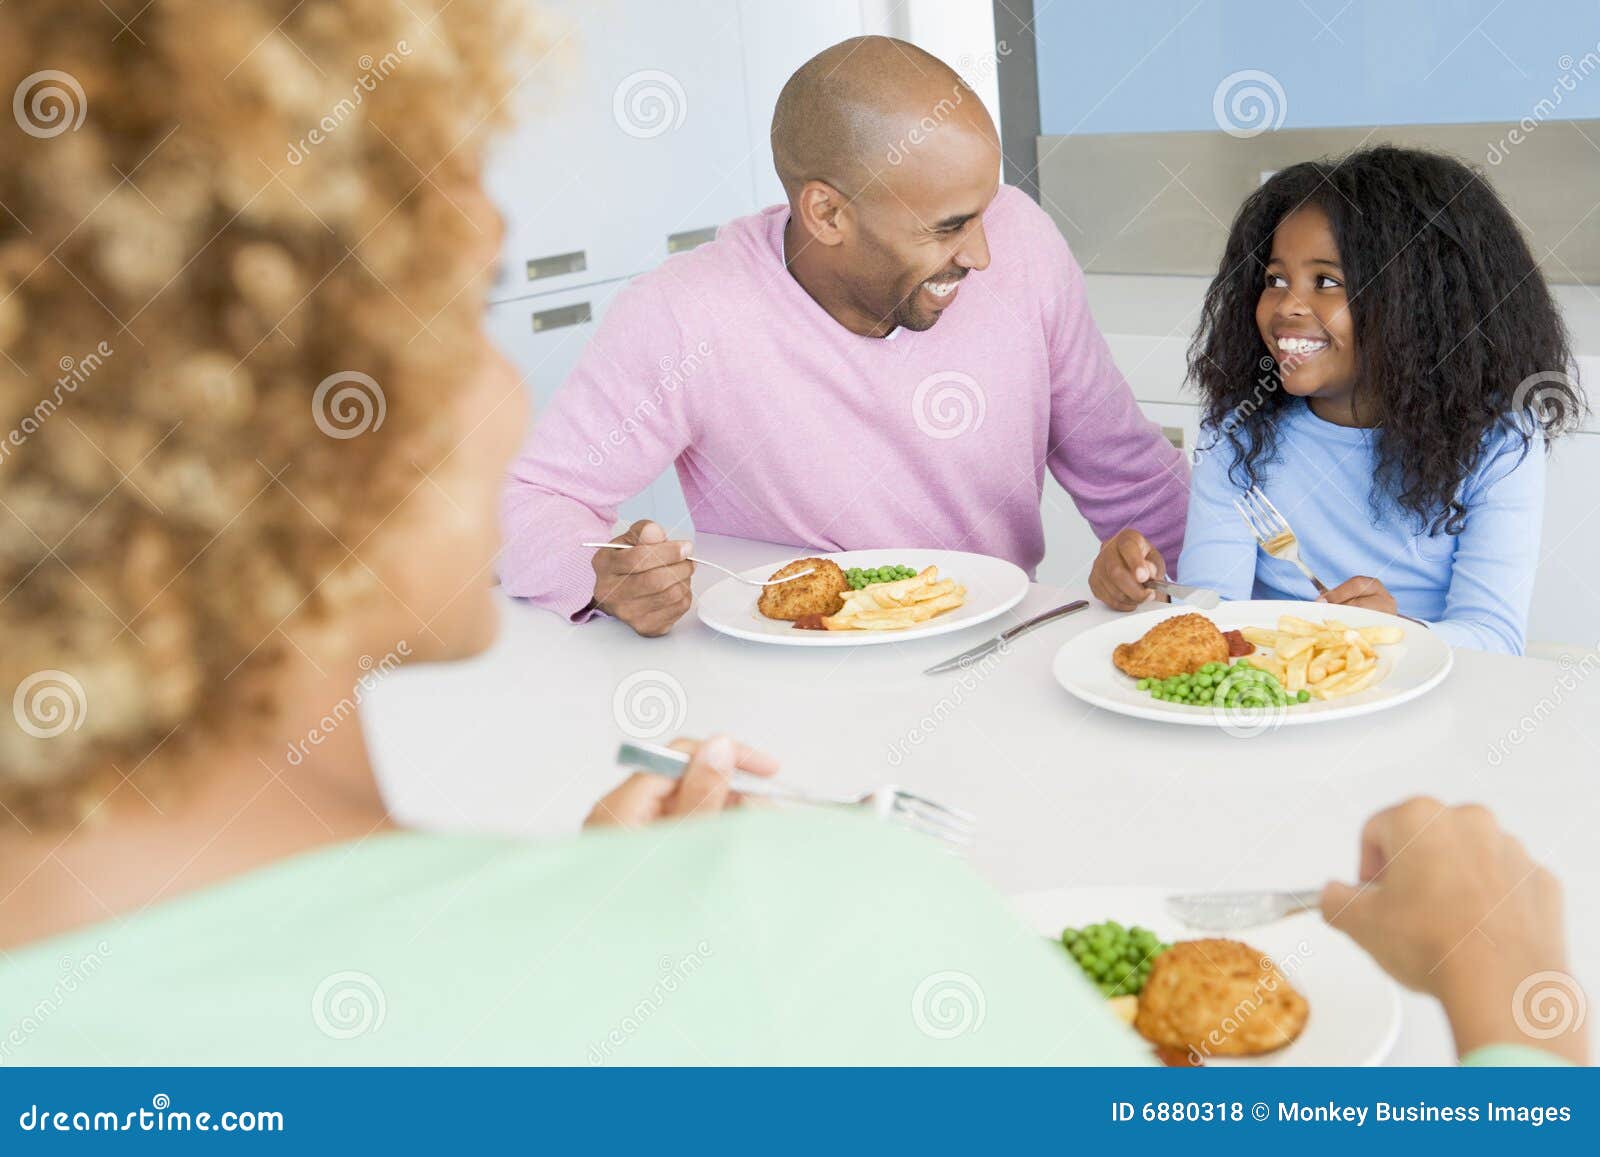 family eating a meal,mealtime together